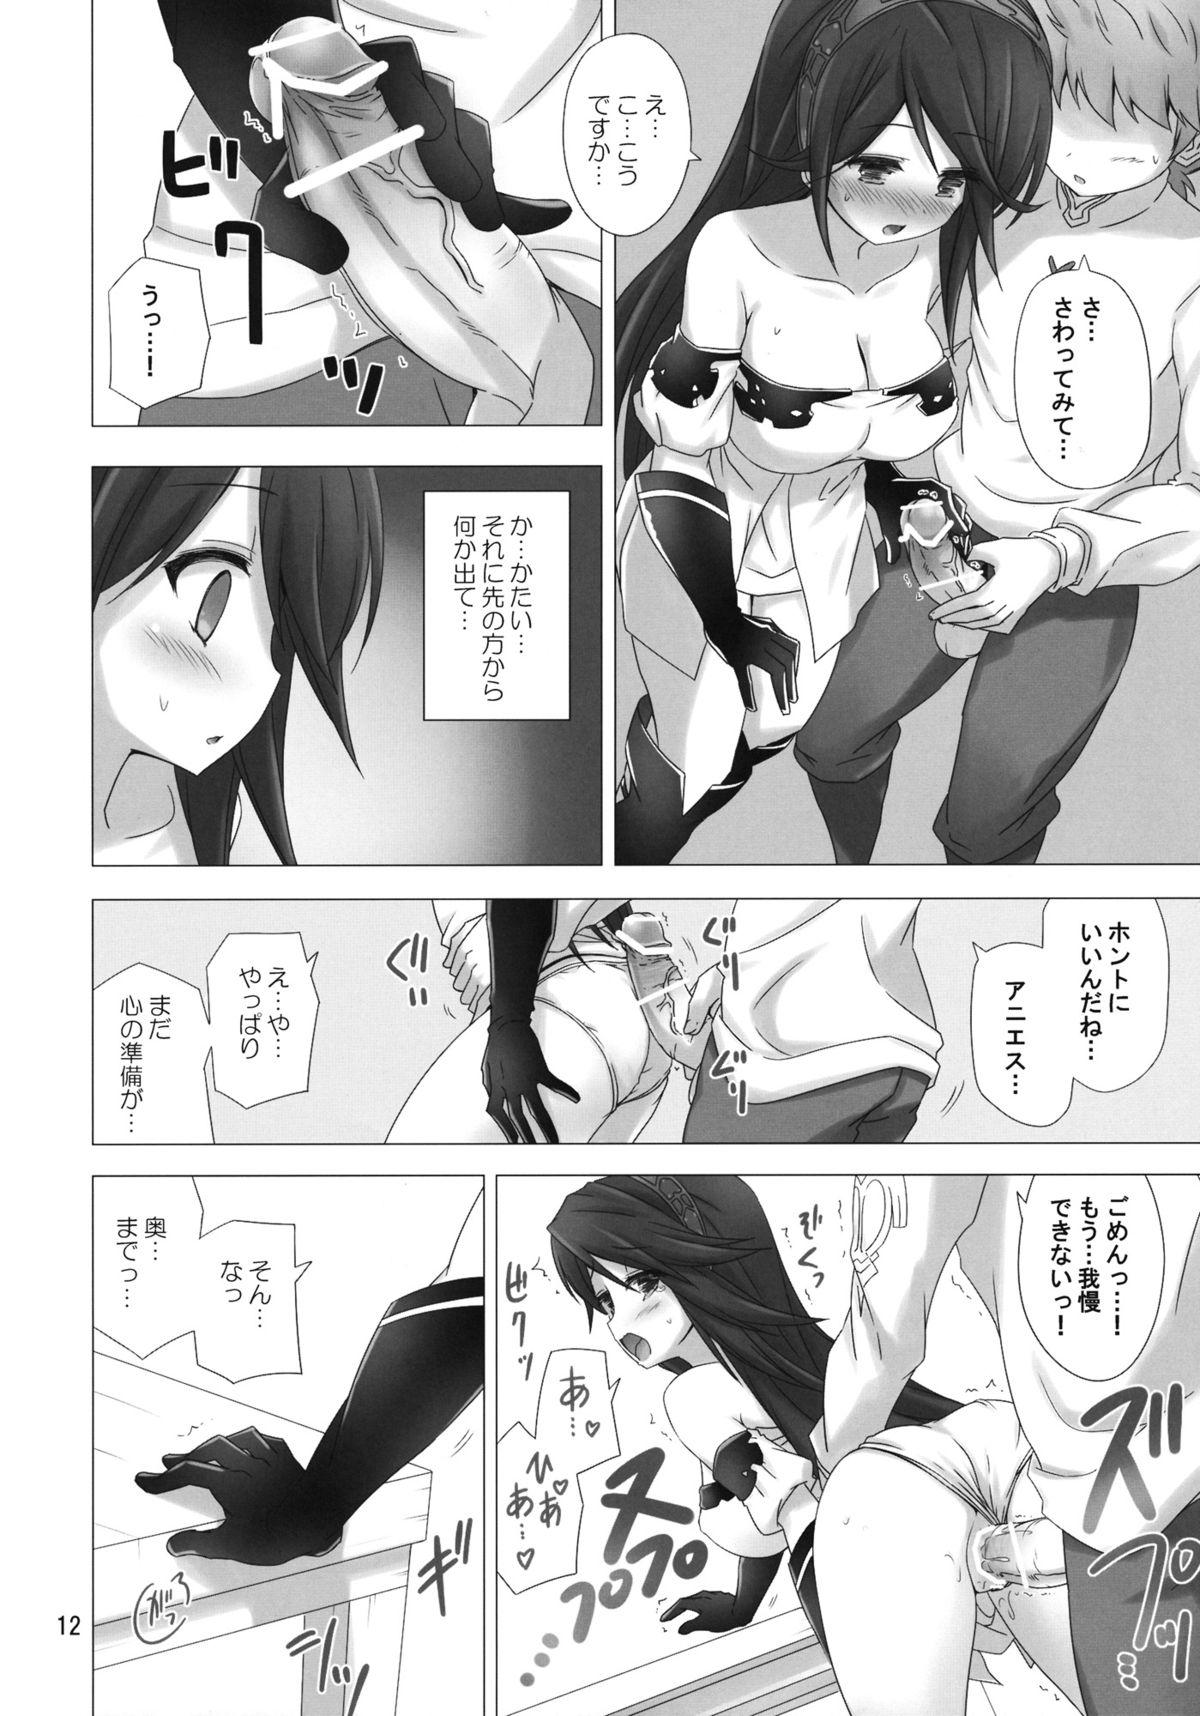 Prostitute FLYING HEART - Bravely default Cheerleader - Page 11